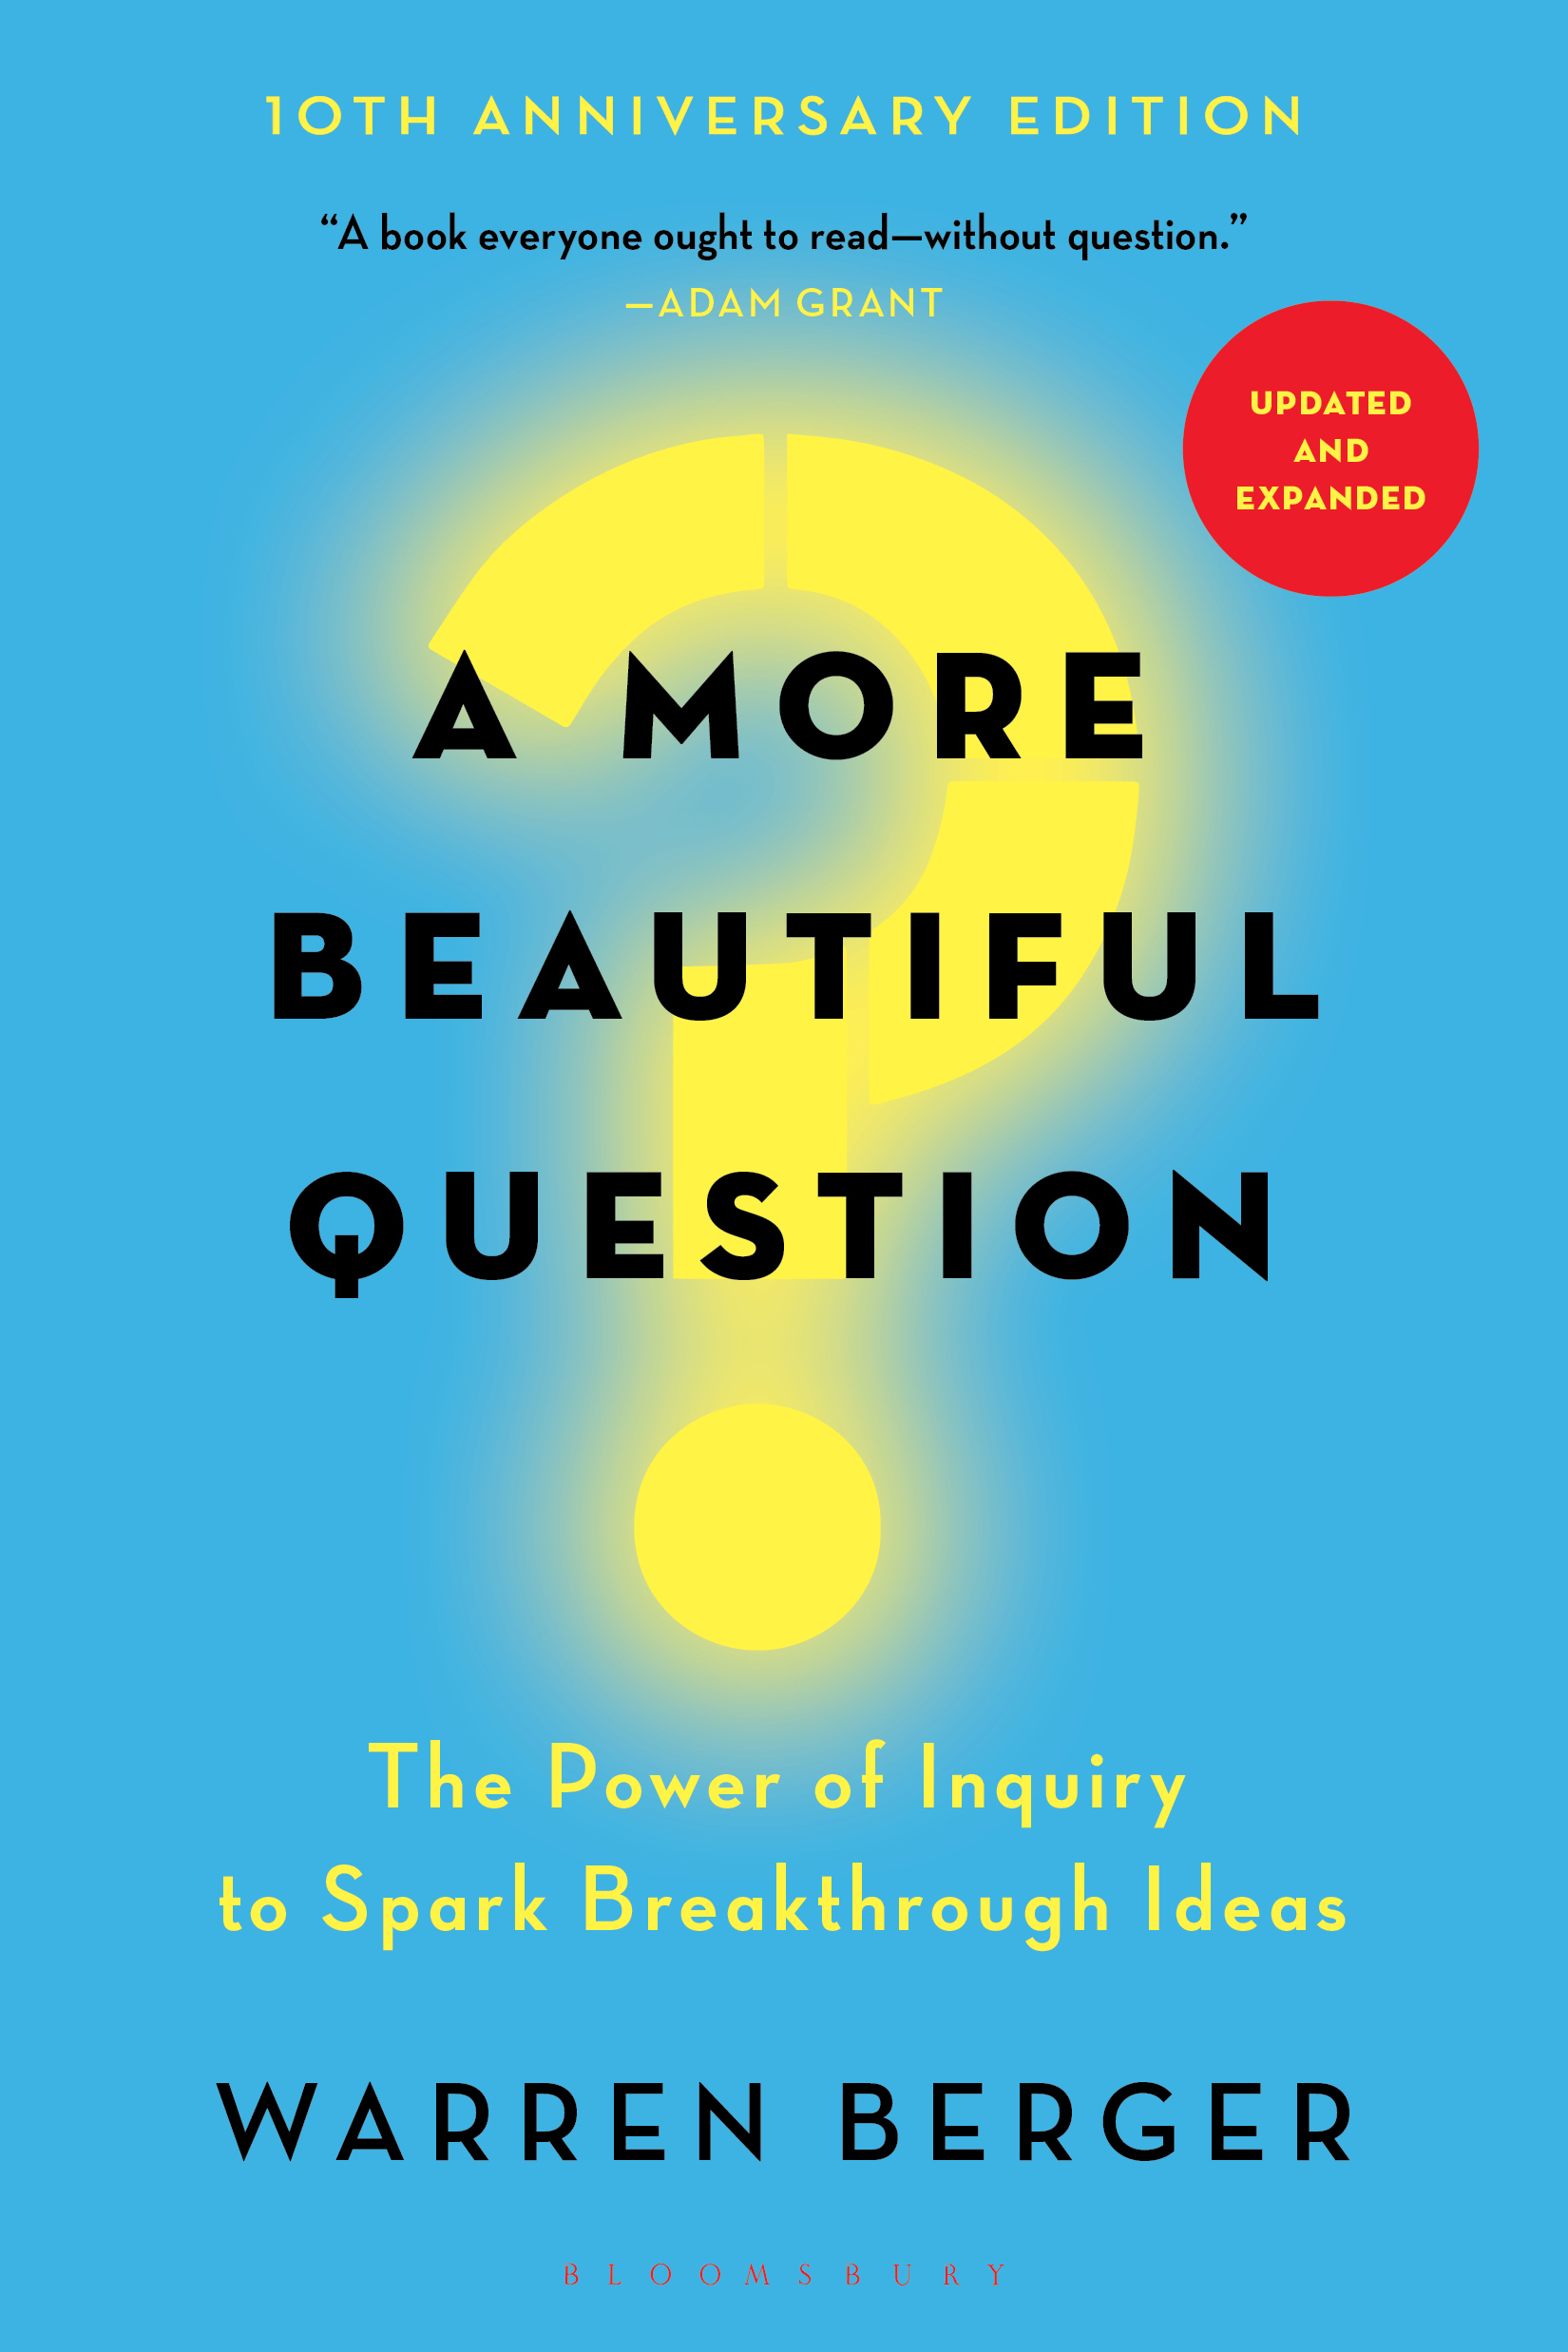 10th Anniversary edition A MORE BEAUTIFUL QUESTION